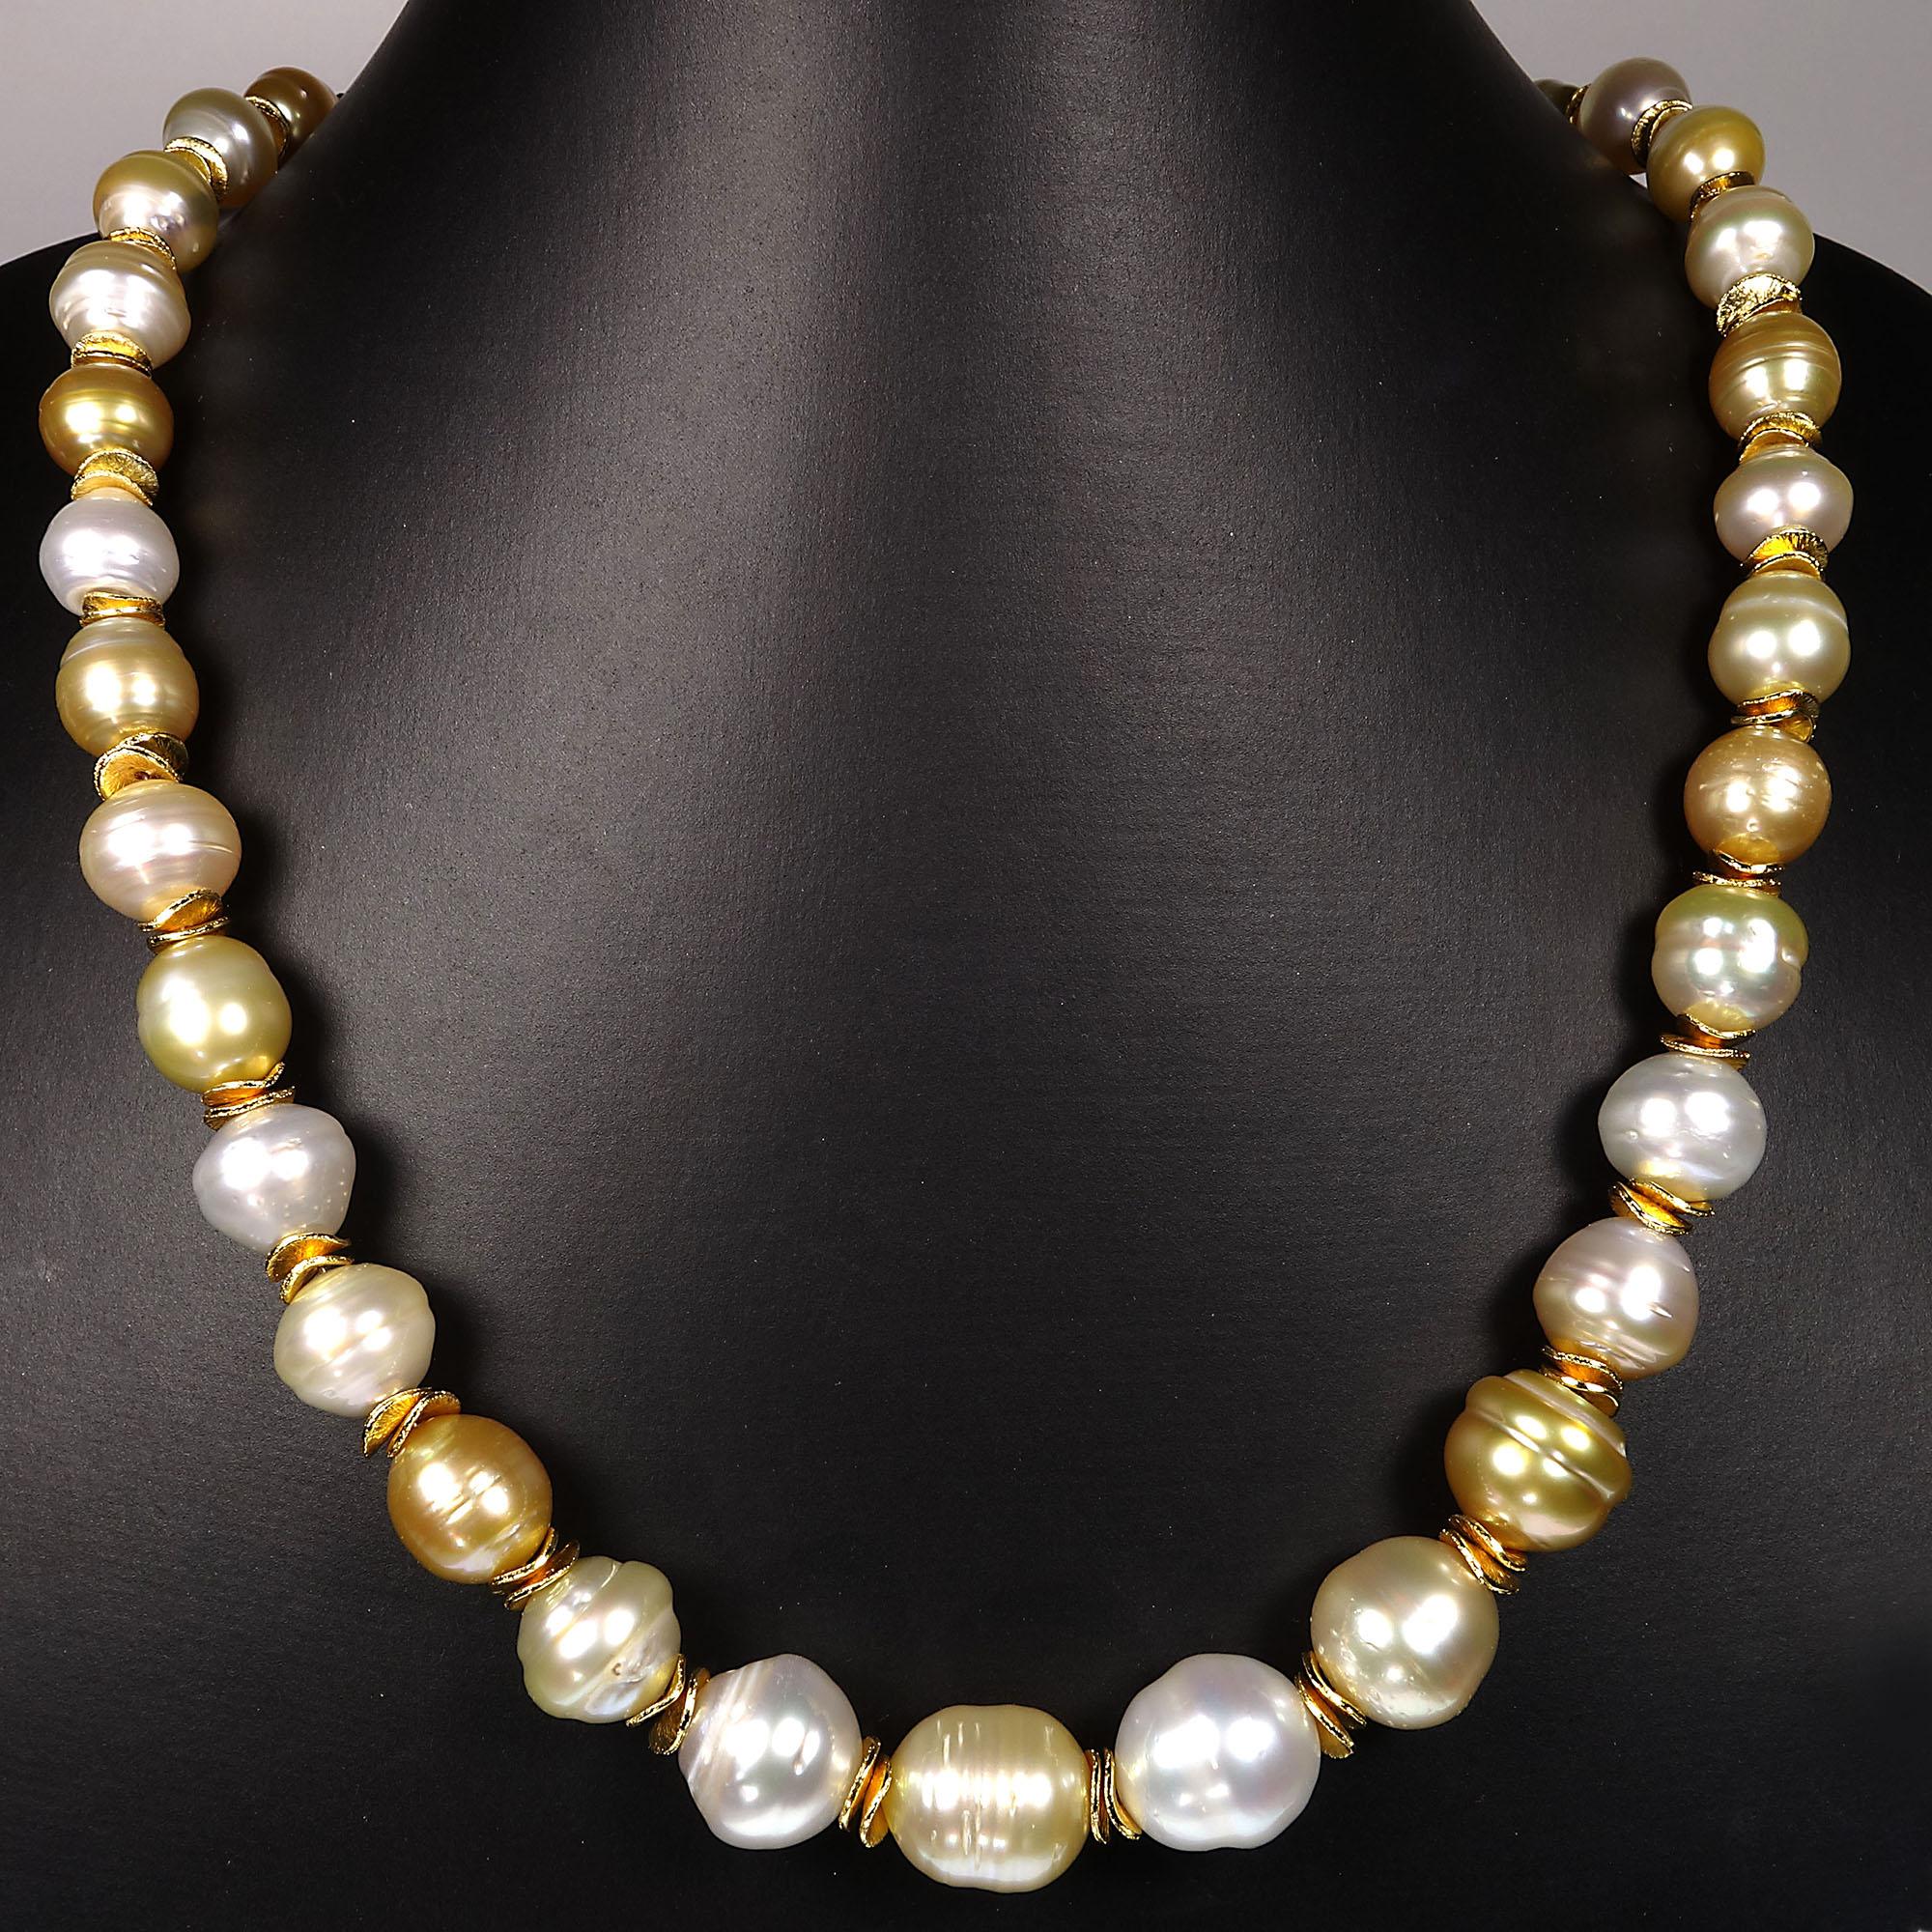 Elegant Baroque Pearl necklace of gold and white tones accented with gold tone flutters.  This unique 21 inch necklace is secured with a 14K gold plate over Sterling Silver hook and eye. Pearl is the June birthstone.  See more from this designer by